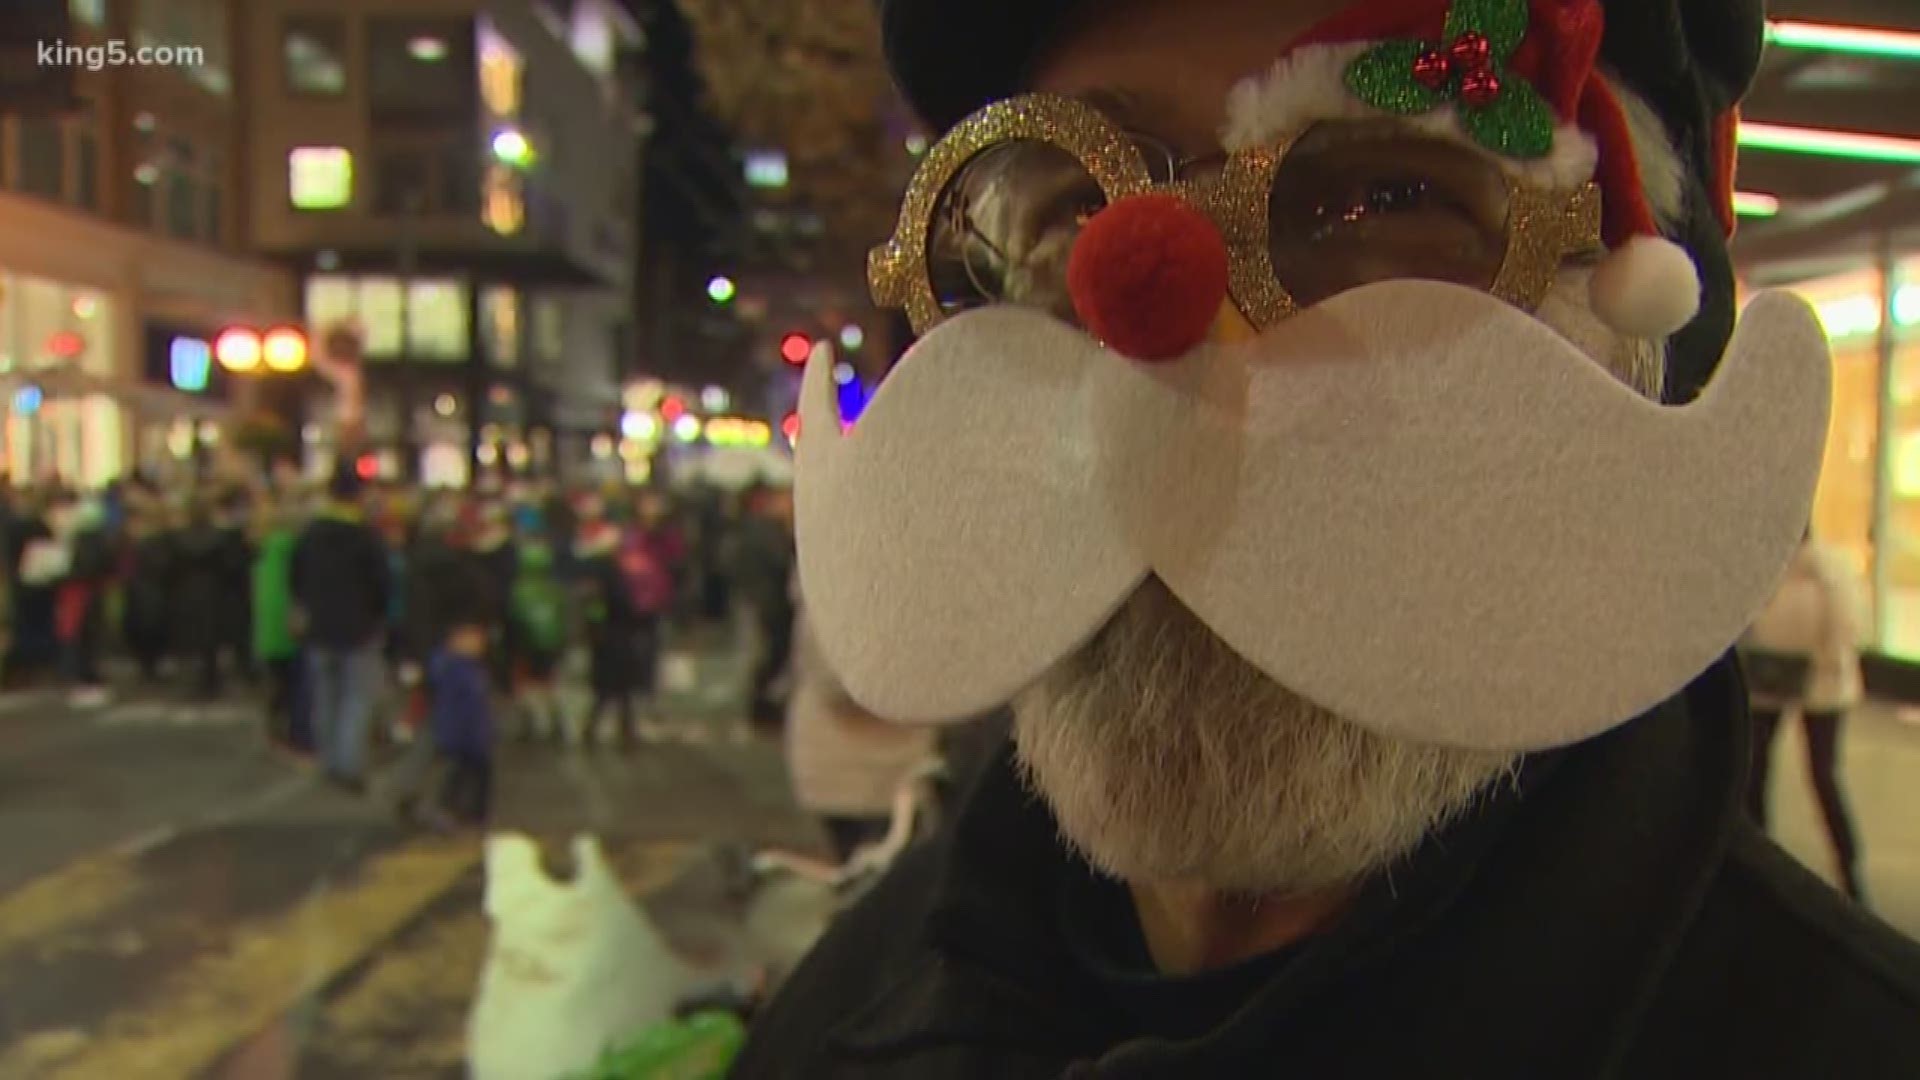 Thousands took to the streets of Seattle for the 32nd annual 'Great Figgy Pudding Caroling Competition' Friday night. The event raises money to benefit the Pike Place Market Senior Center and Food Bank.